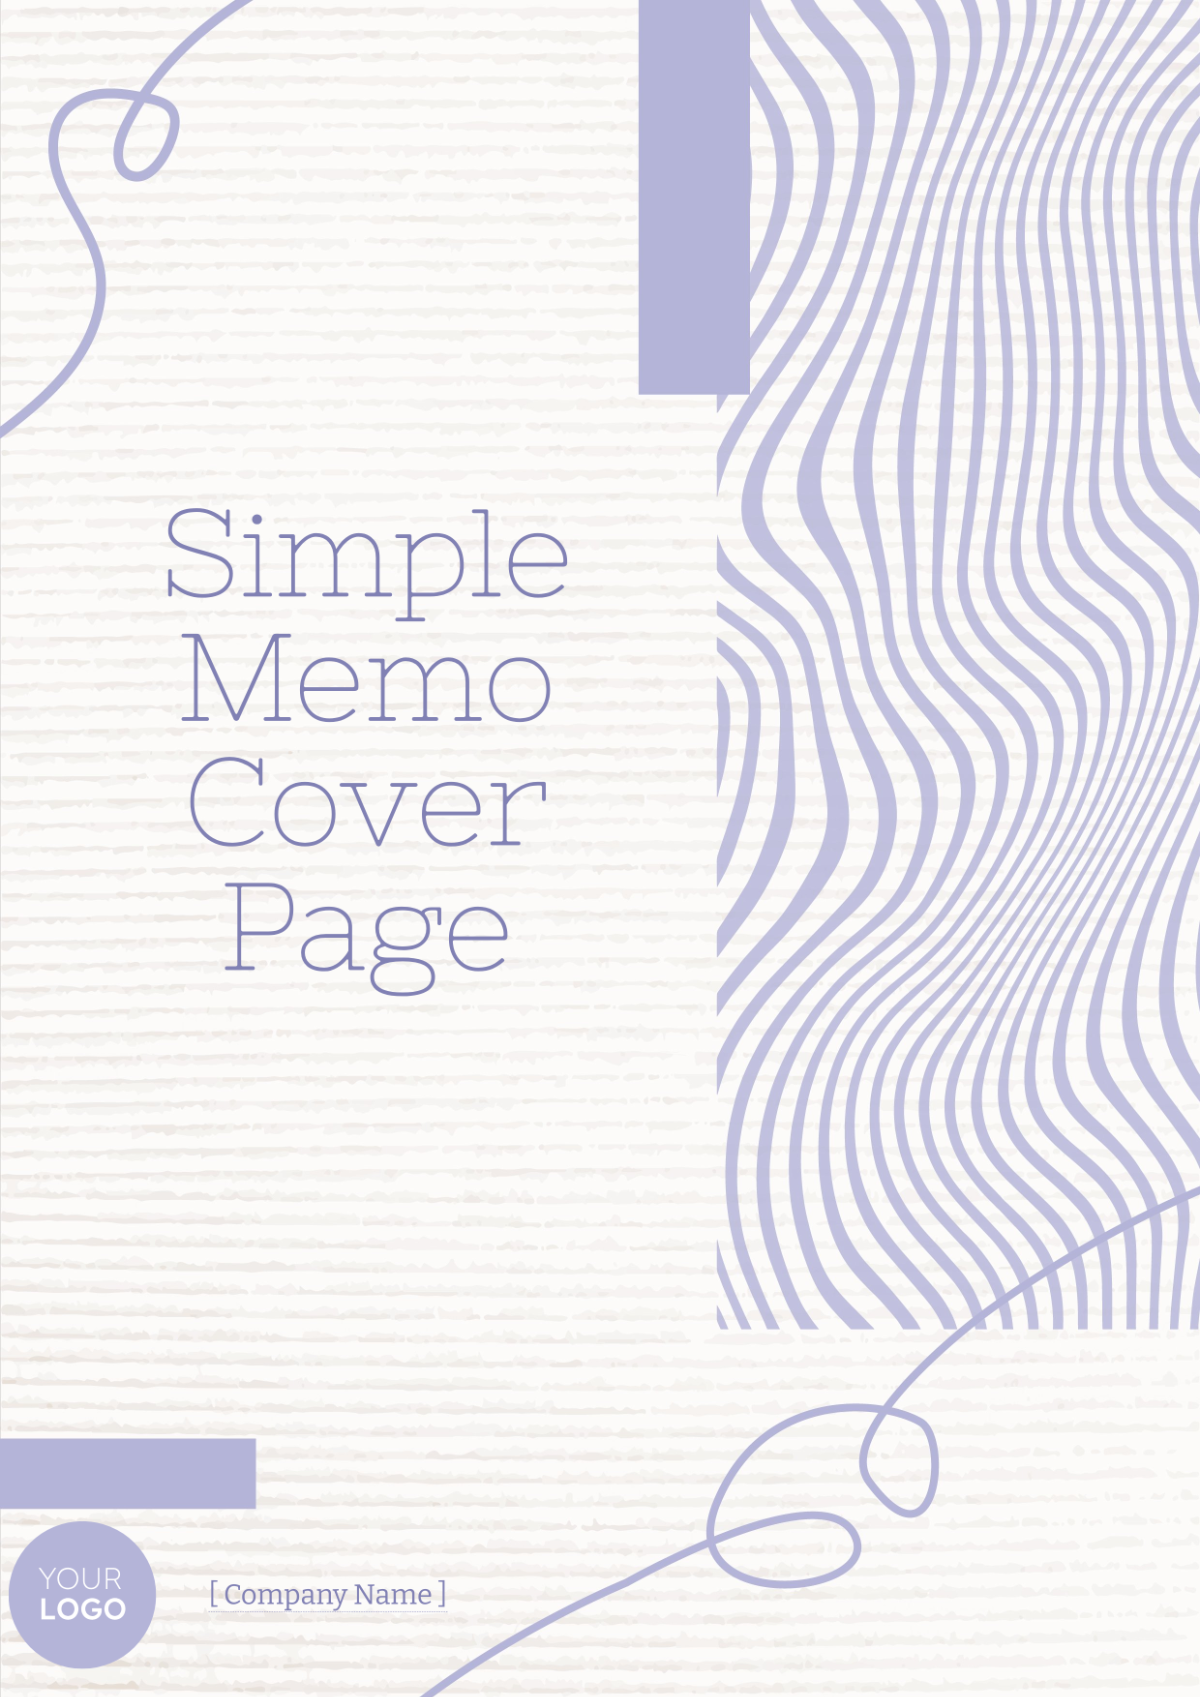 Simple Memo Cover Page Template